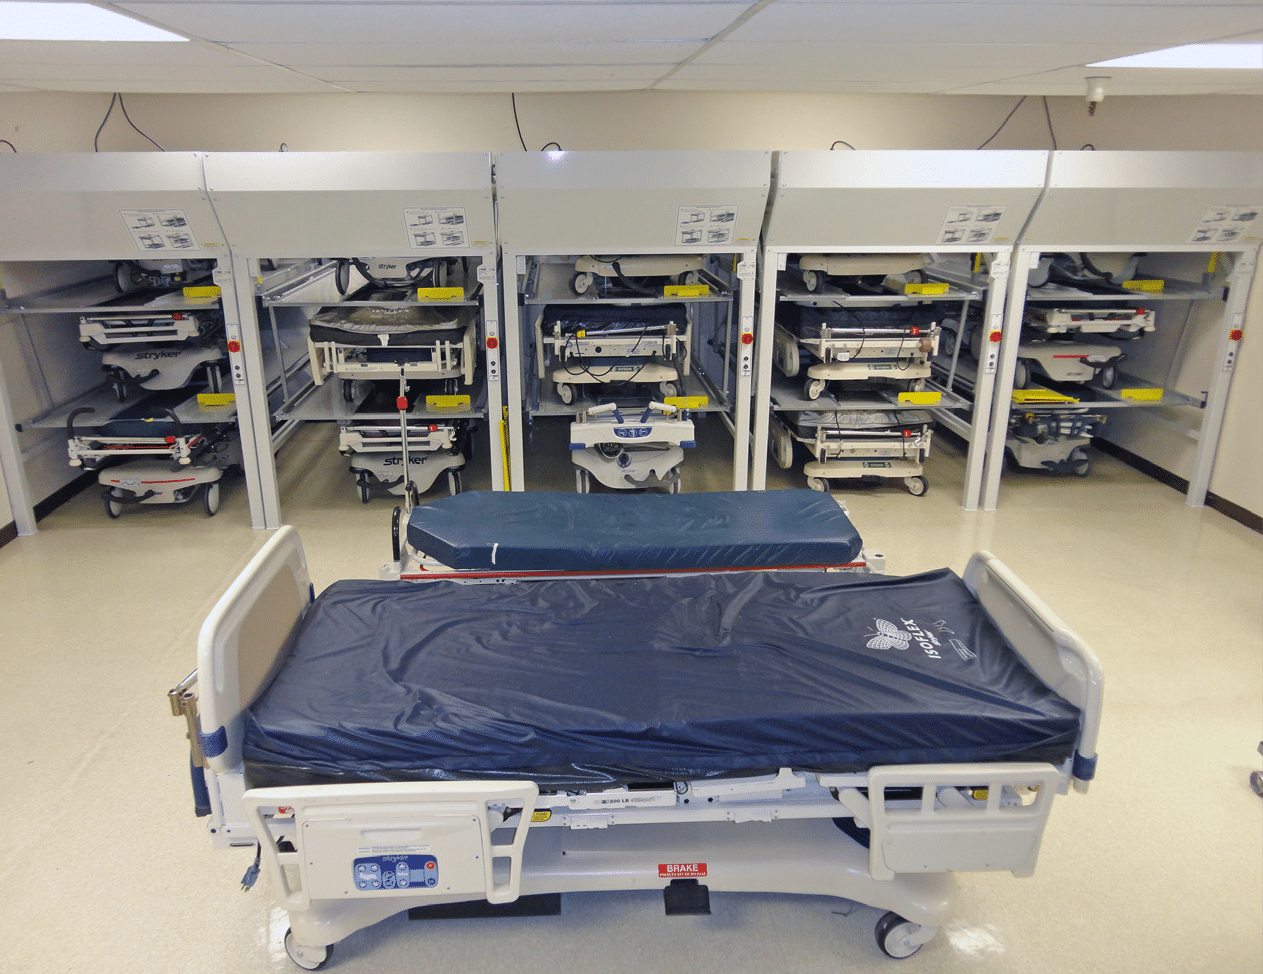 Service hospital beds without the hassleTRANSLYFT makes it easy.